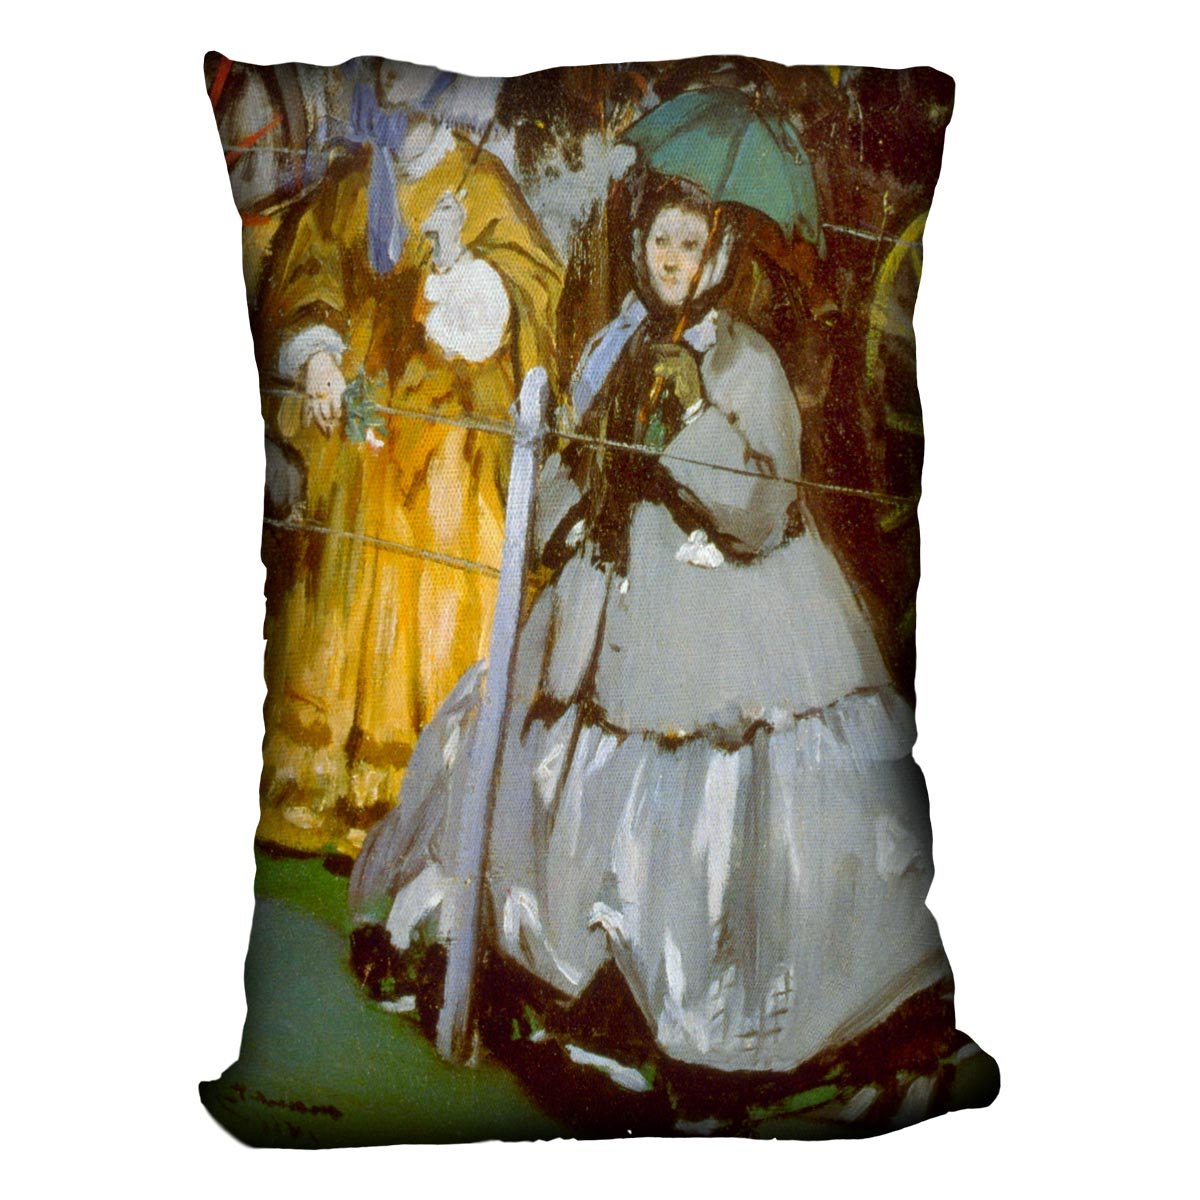 Racecourse by Manet Throw Pillow